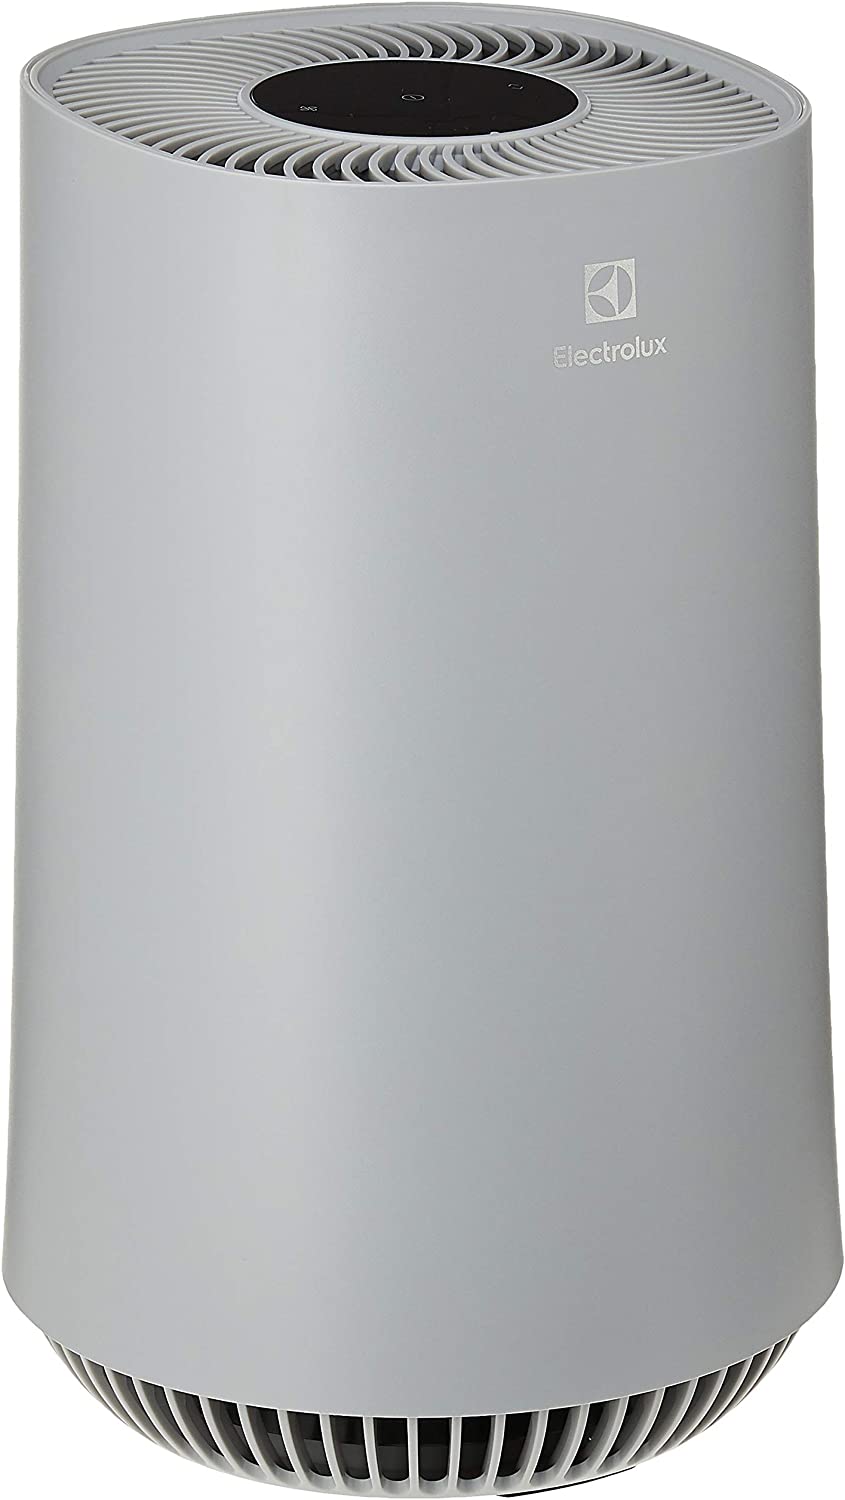 Electrolux Air Purifier Air Flow A3 | Color Gray | Best Home Appliances and Electronics in Bahrain | Halabh